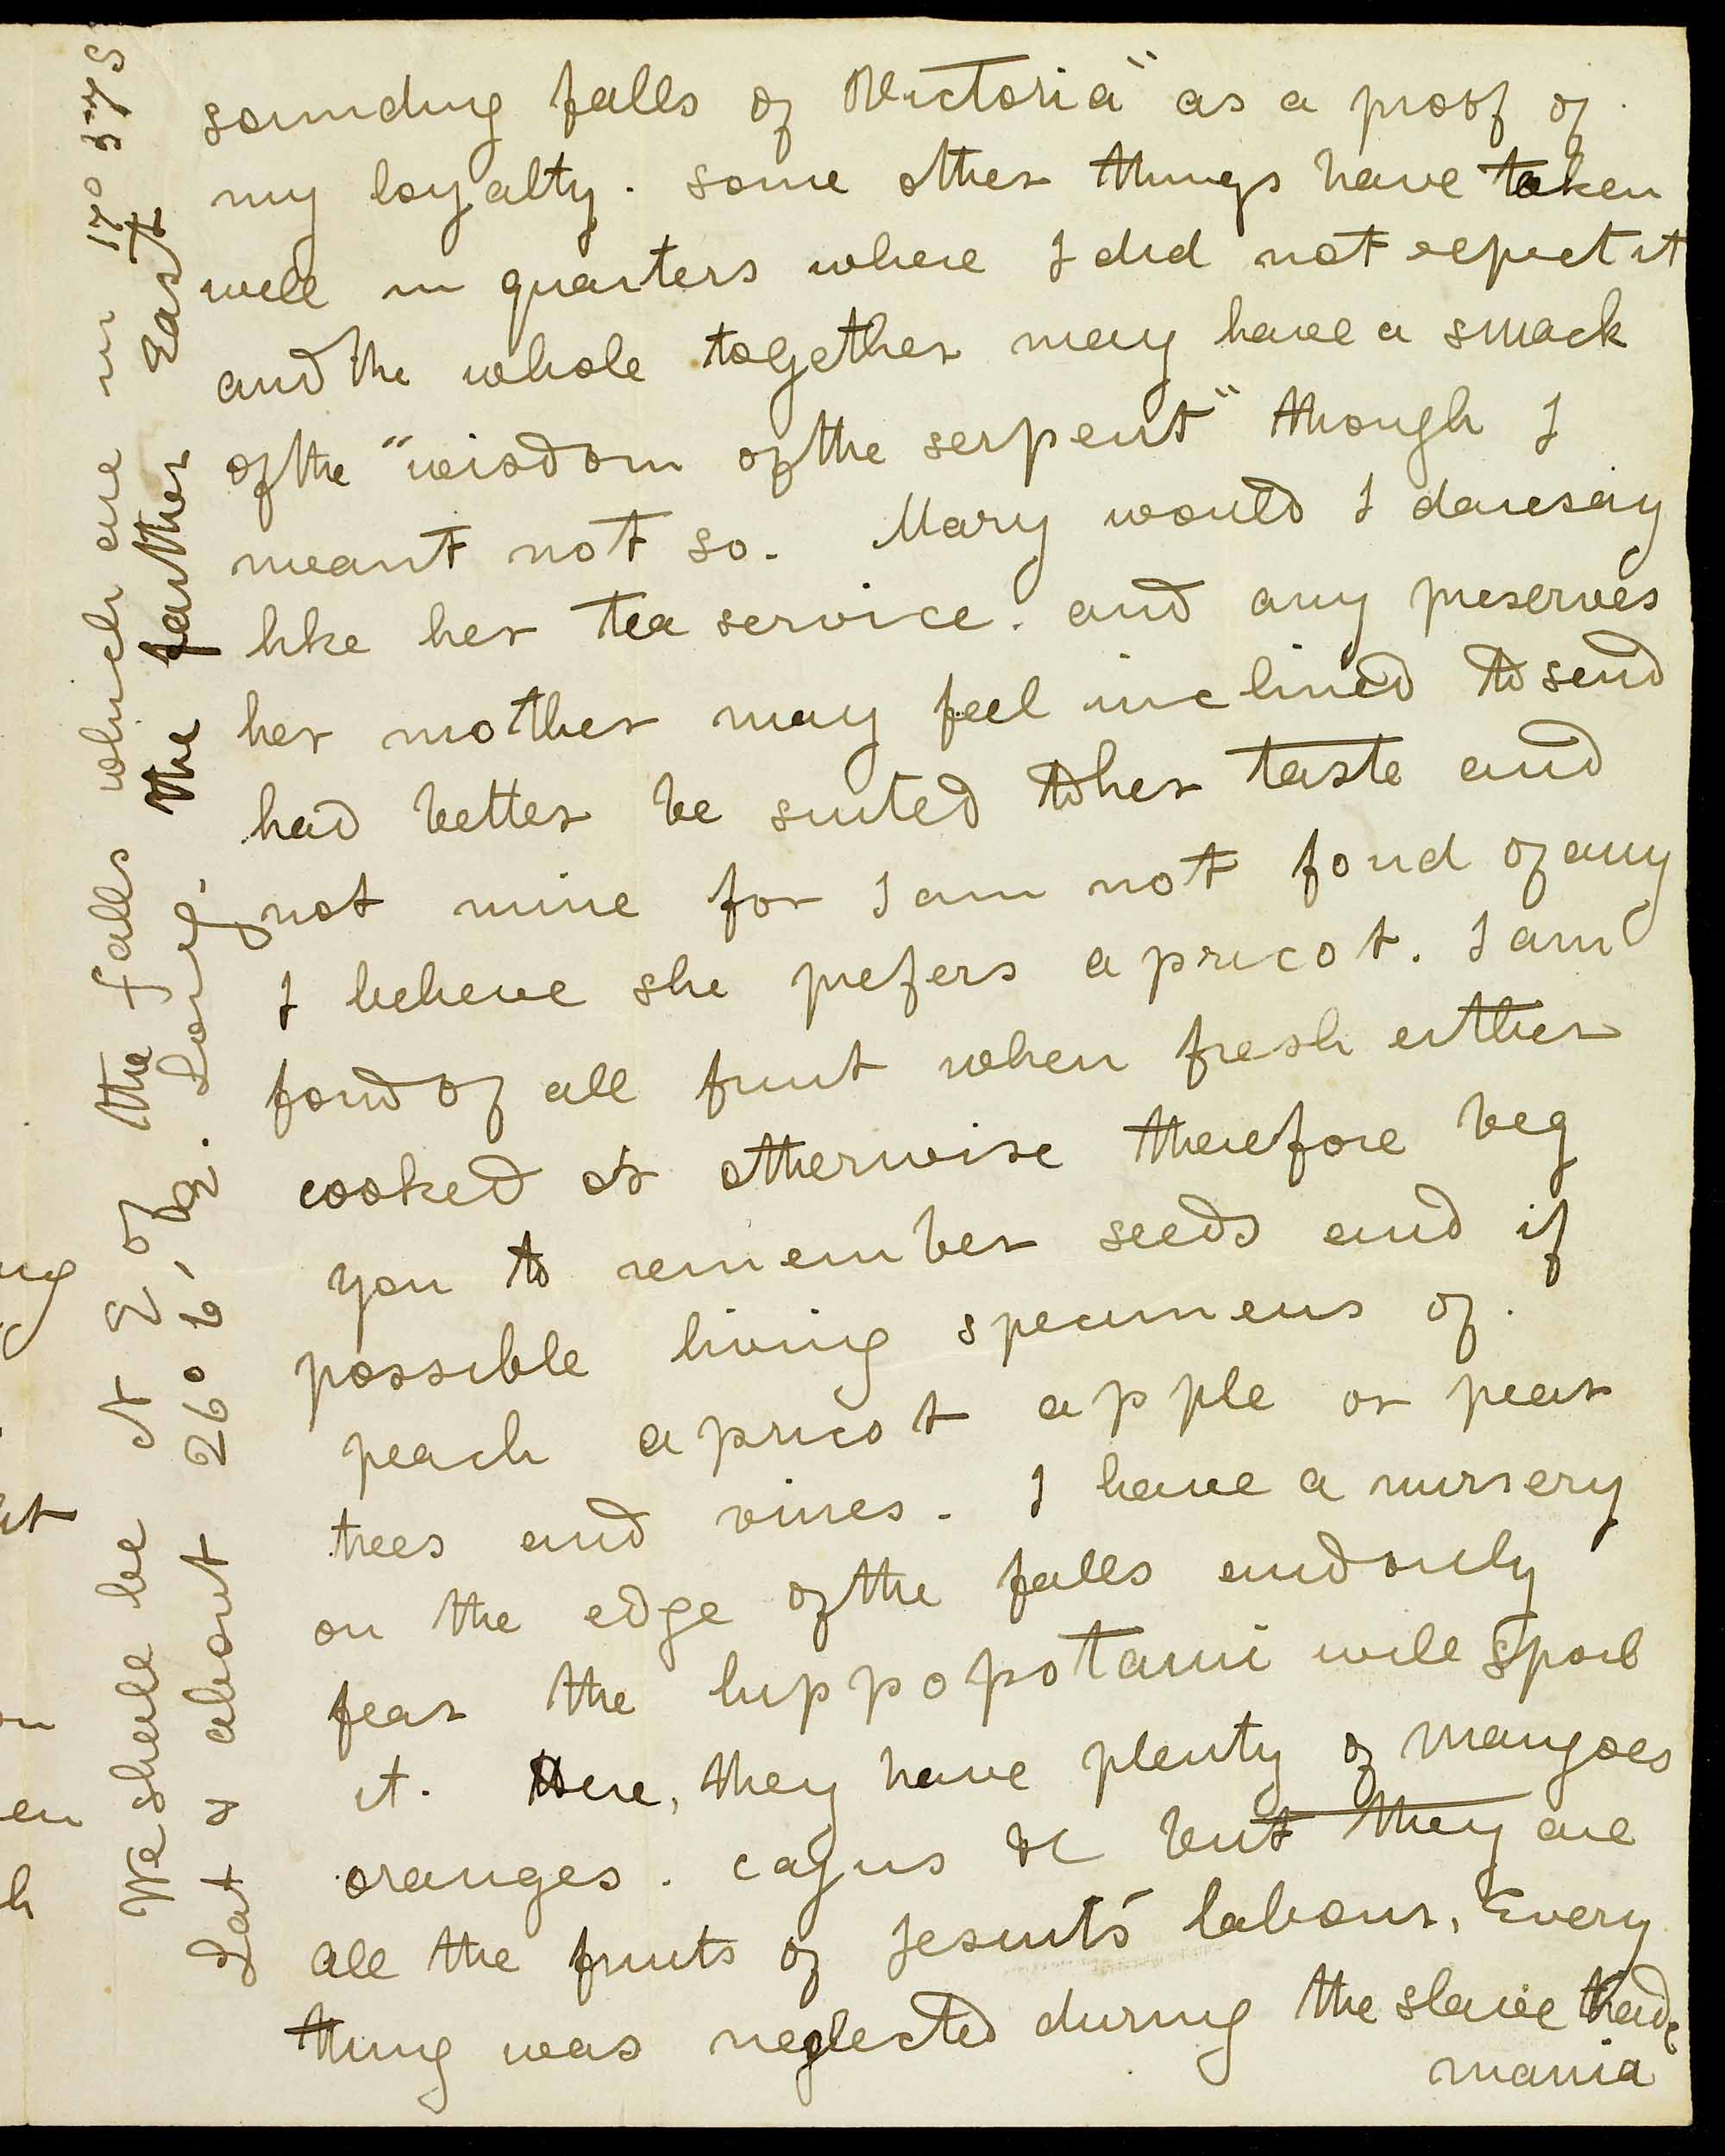 Letter to Robert Moffat 1, [2 March 1856?].  Moffat was commissioned by the London Missionary Society in 1816 and sent to South Africa. SOAS Library, University of London. Copyright Council for World Mission and Dr. Neil Imray Livingstone Wilson, as relevant. Used by permission for private study, educational or research purposes only. Please contact SOAS Archives & Special Collections on docenquiry@soas.ac.uk for permission to use this material for any other purpose.